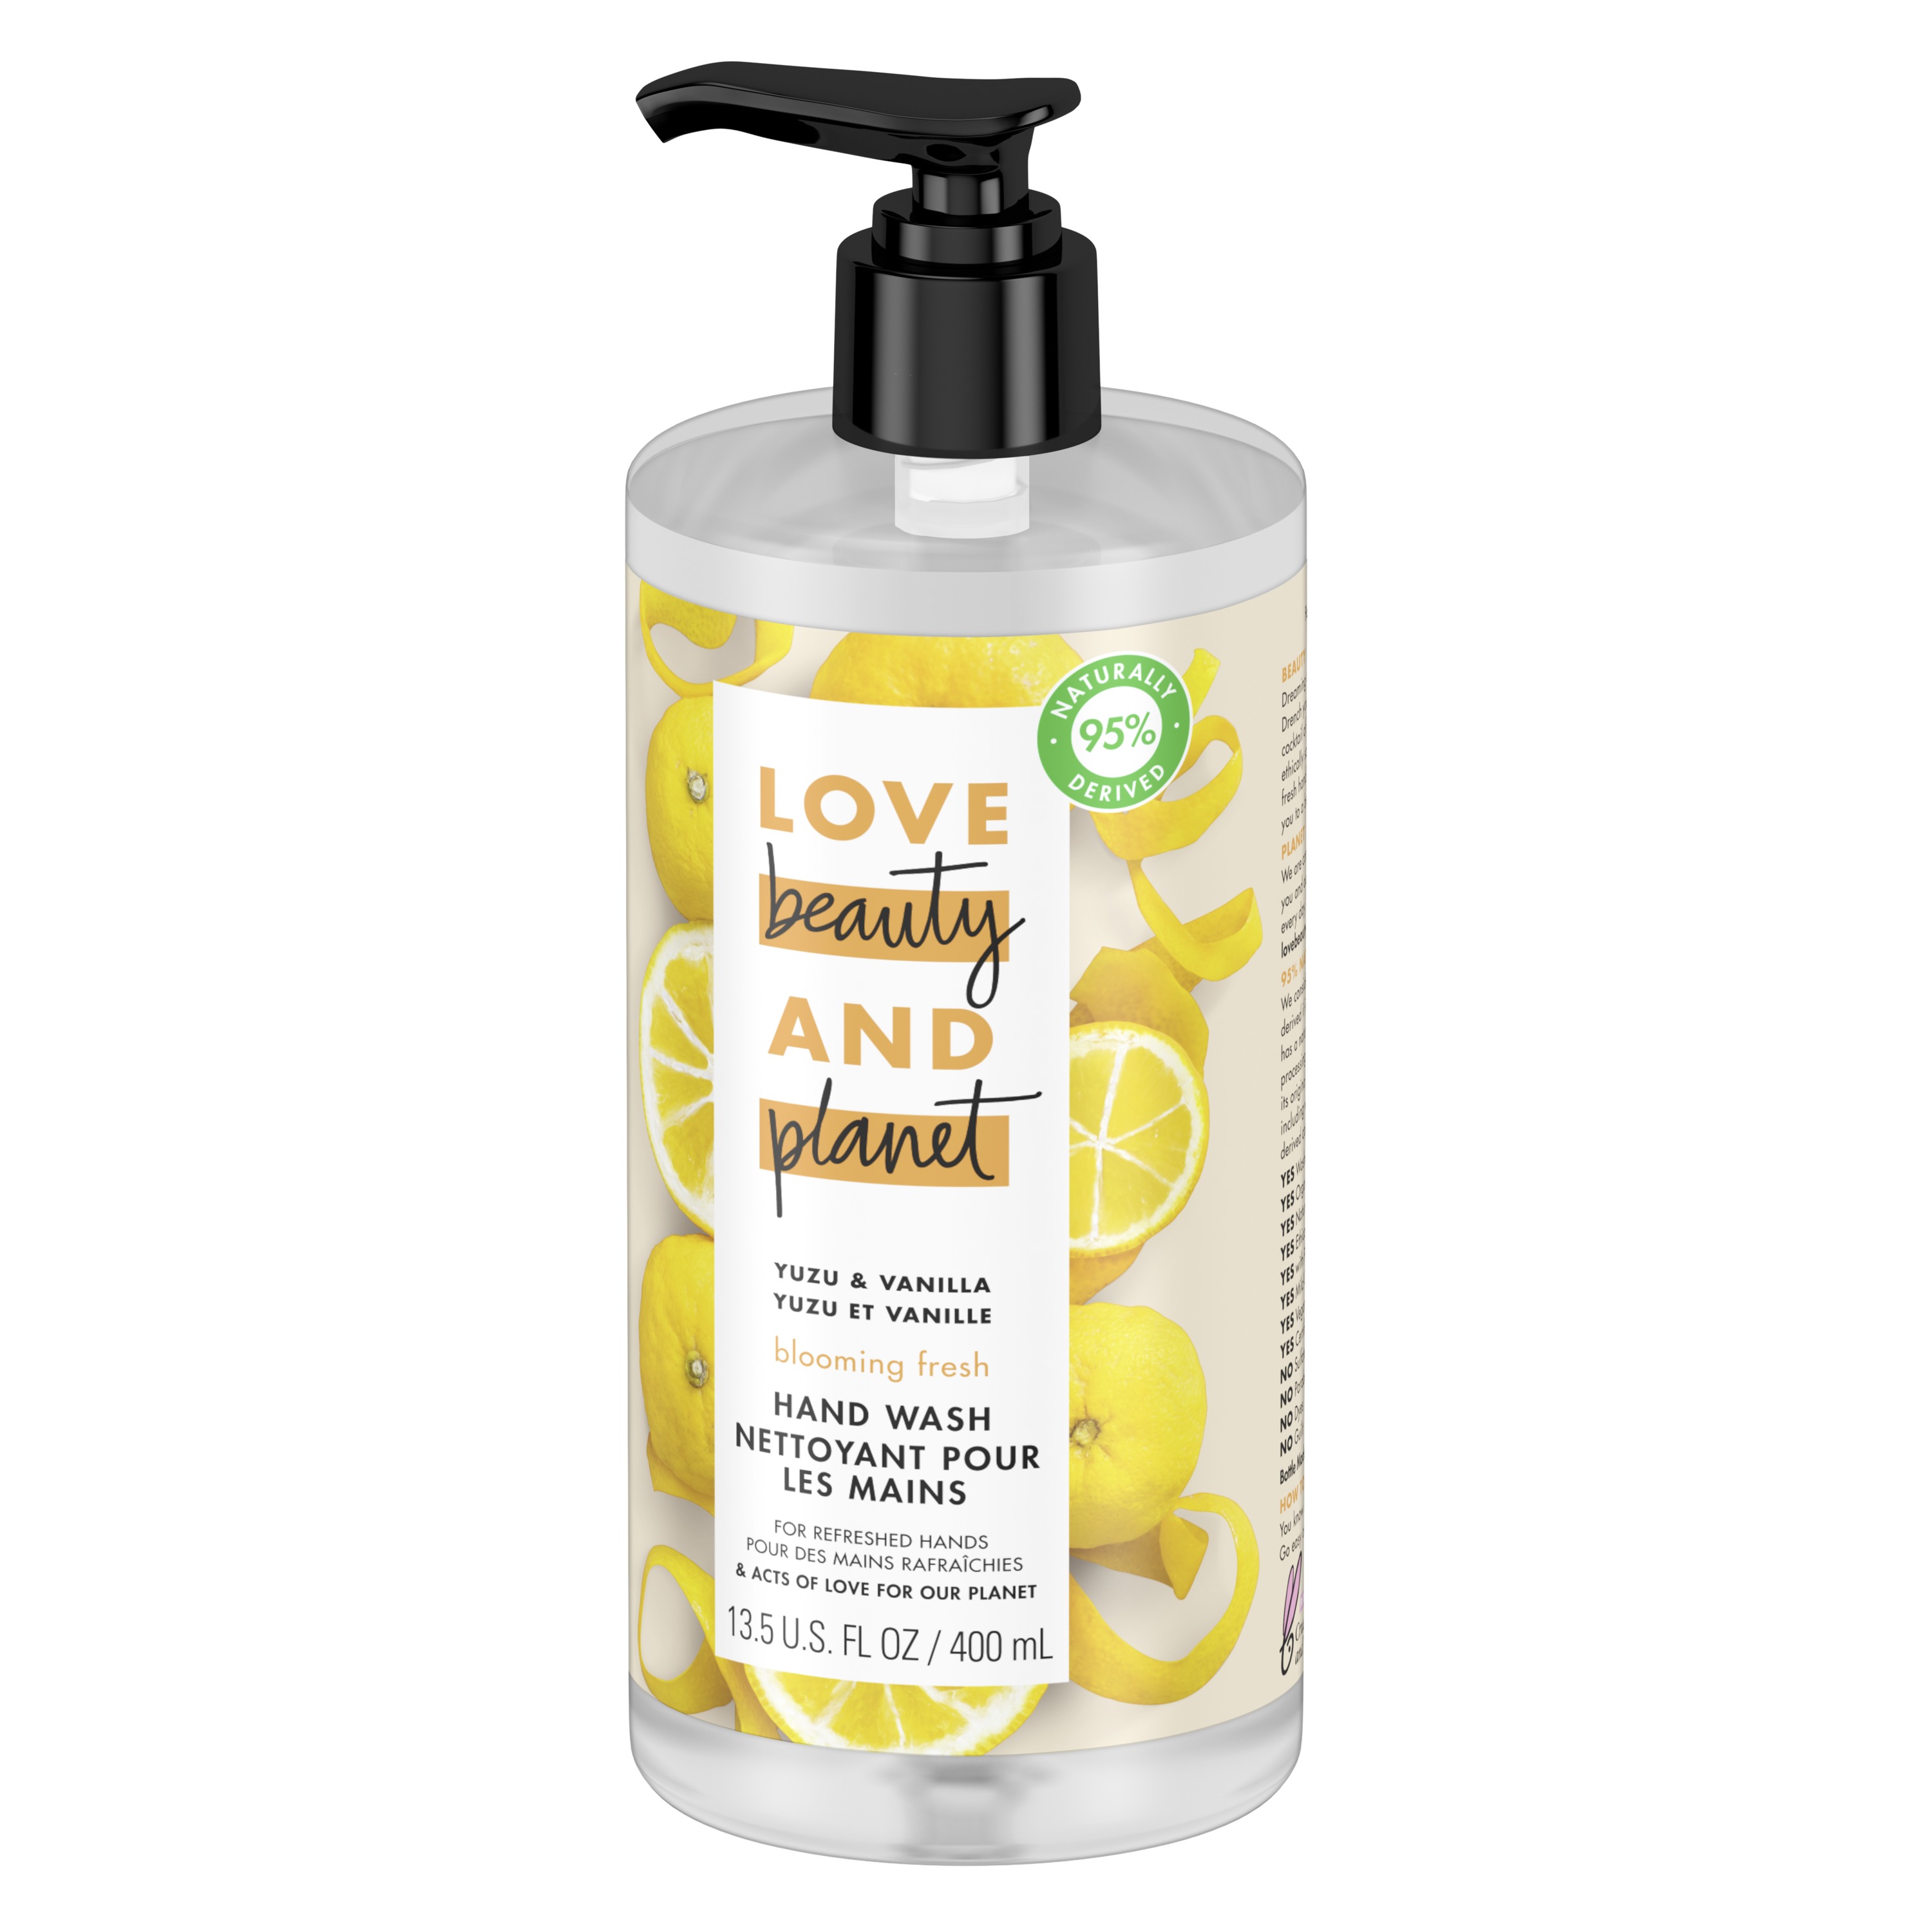 Love Beauty And Planet Blooming Fresh Hand Soap Yuzu & Vanilla 13.5 oz - image 4 of 8